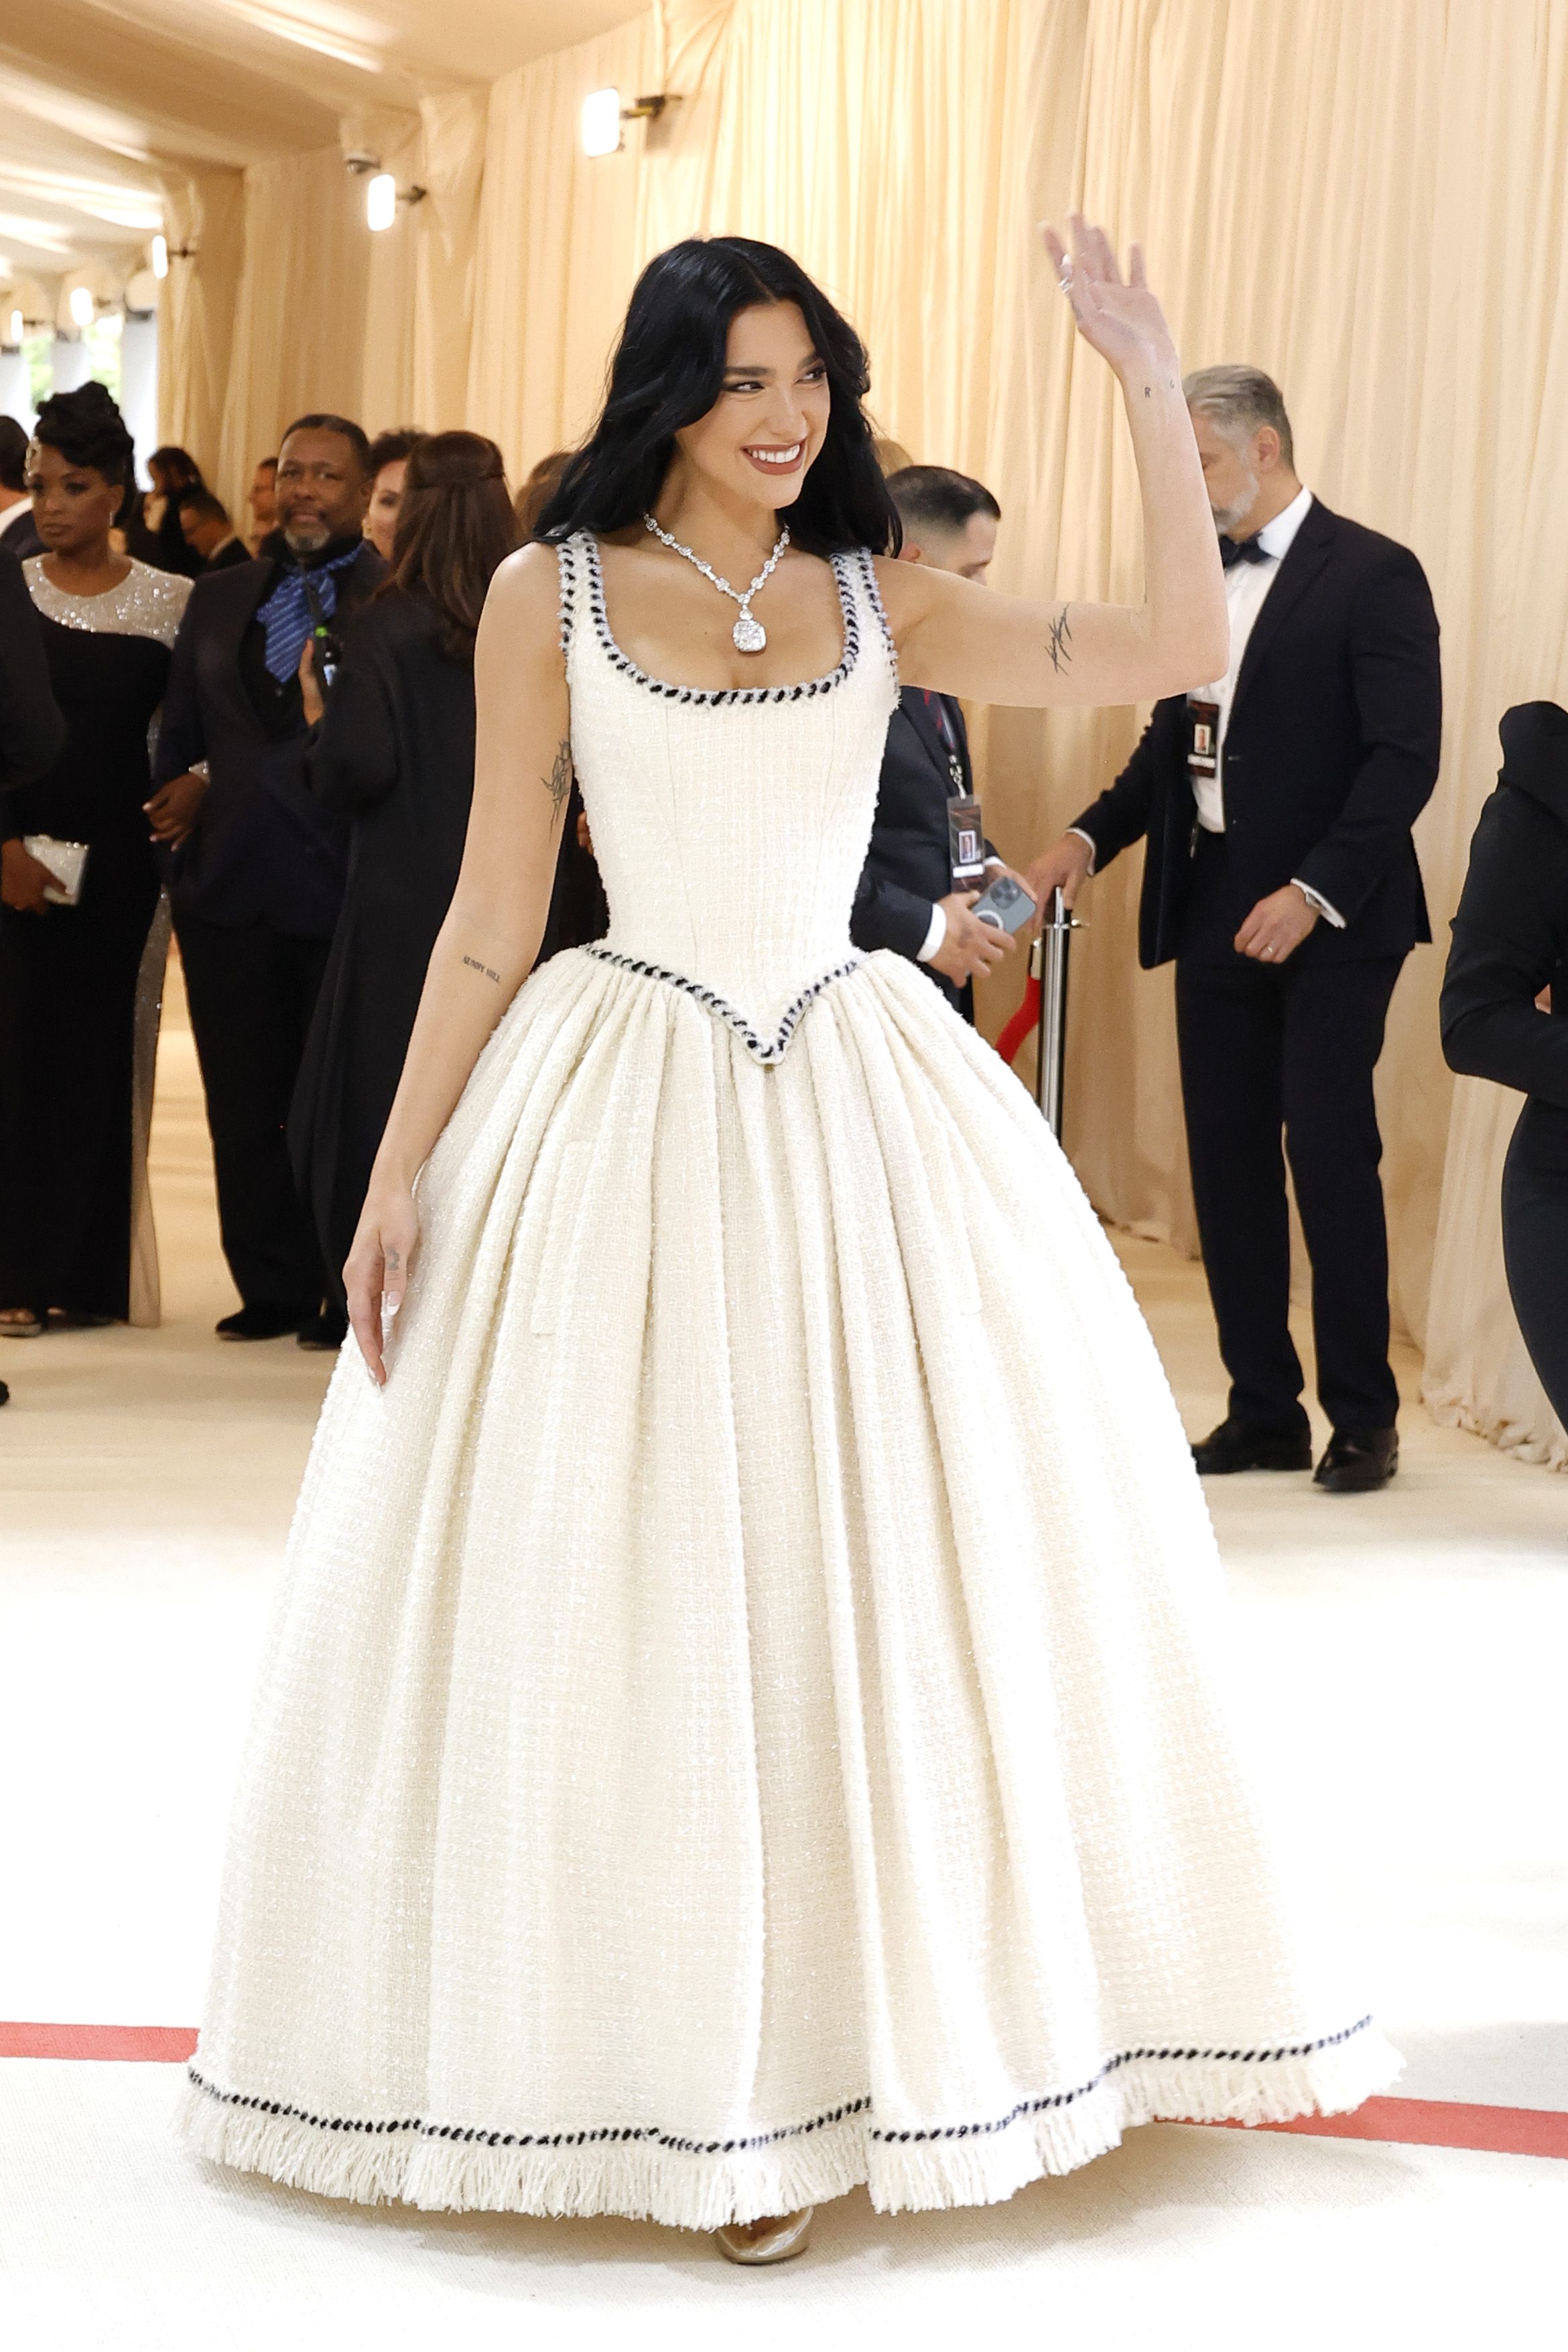 Met Gala 2023 News, Pictures, and Videos - E! Online